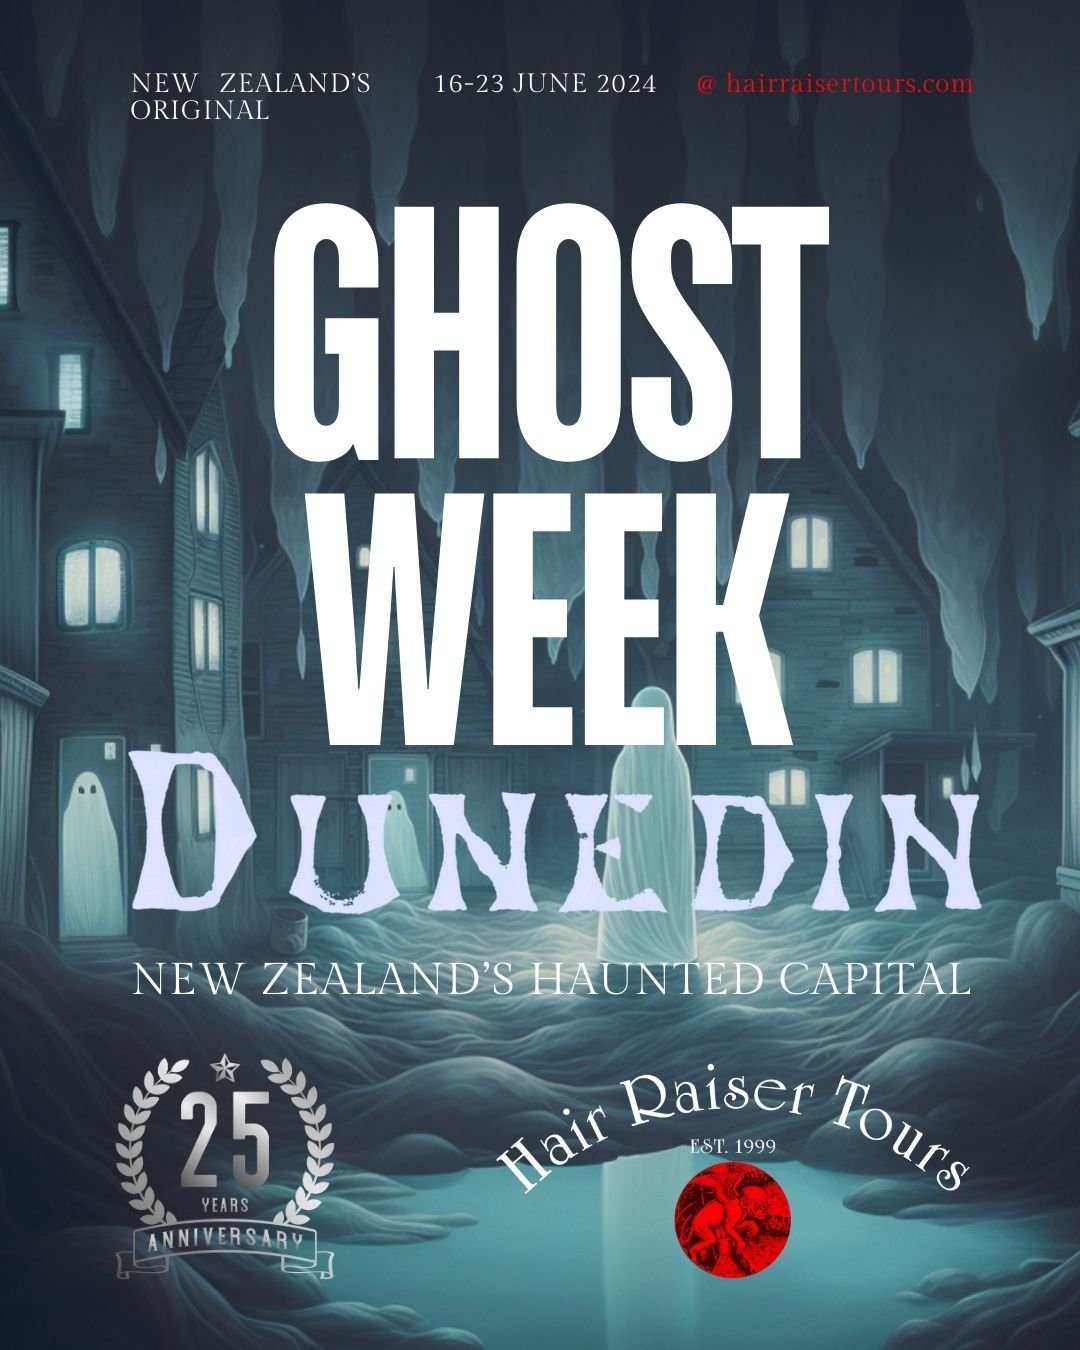 It's an exceptional milestone: 25 years of NEW ZEALAND'S ORIGINAL GHOST TOUR COMPANY, guided by our one and only haunted historian, Andrew Smith. Since our inception in 1999, our dedicated guide has led intrepid souls through the snickleways and ceme